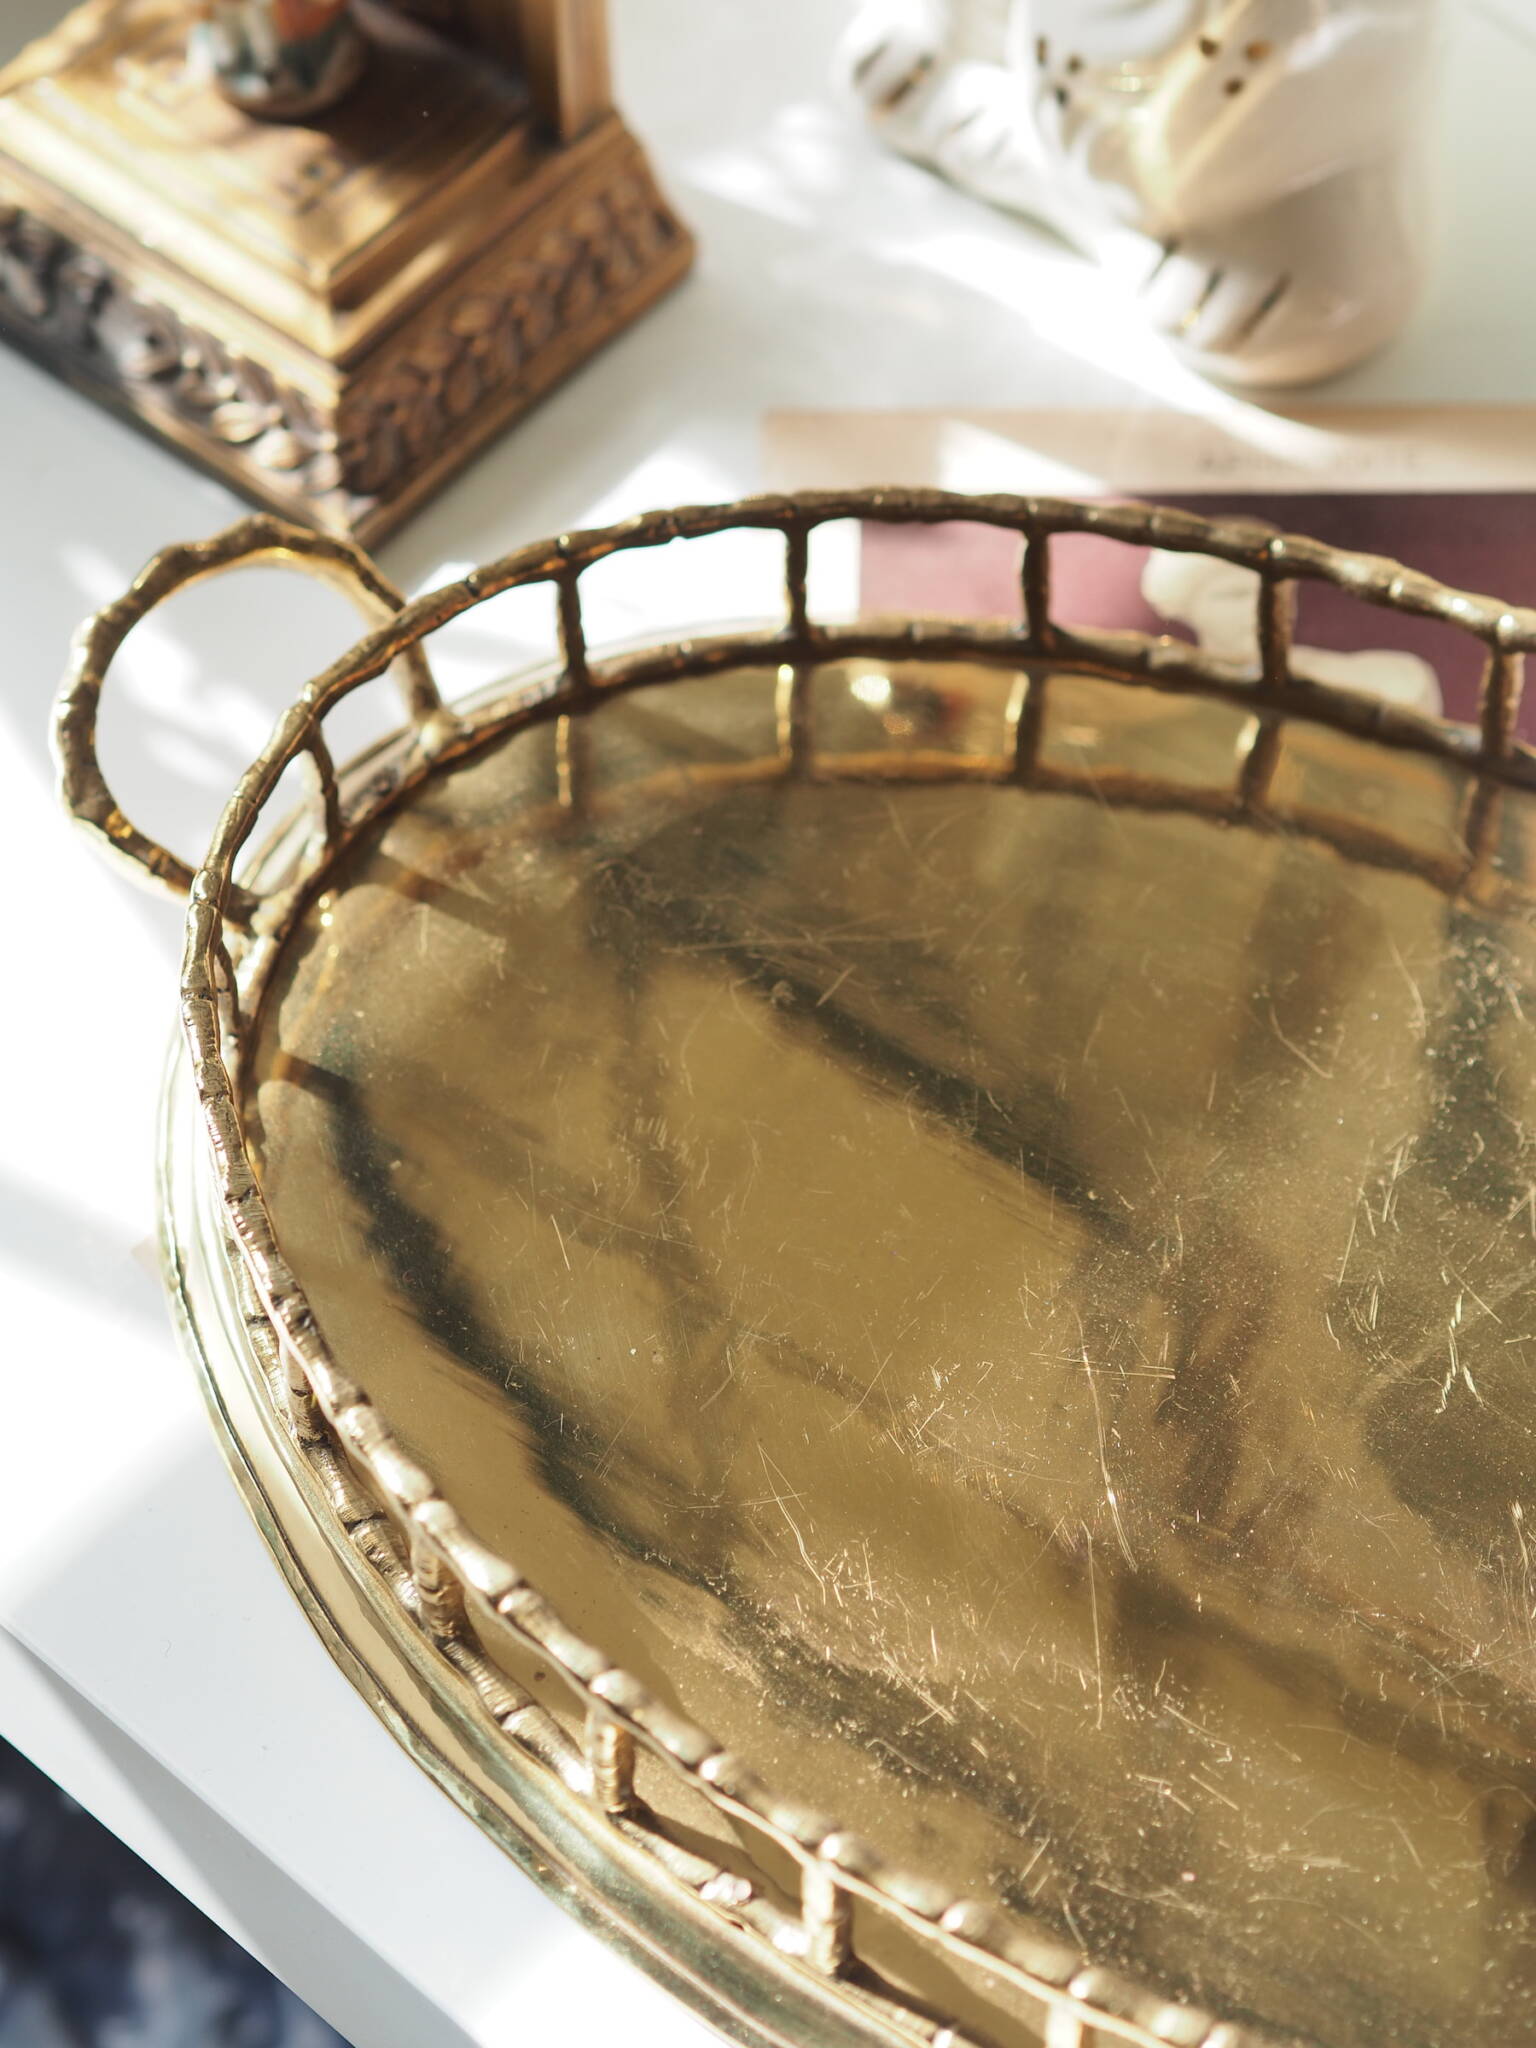 Hollywood Regency Faux Bamboo Oval Brass Serving Tray at 1stDibs